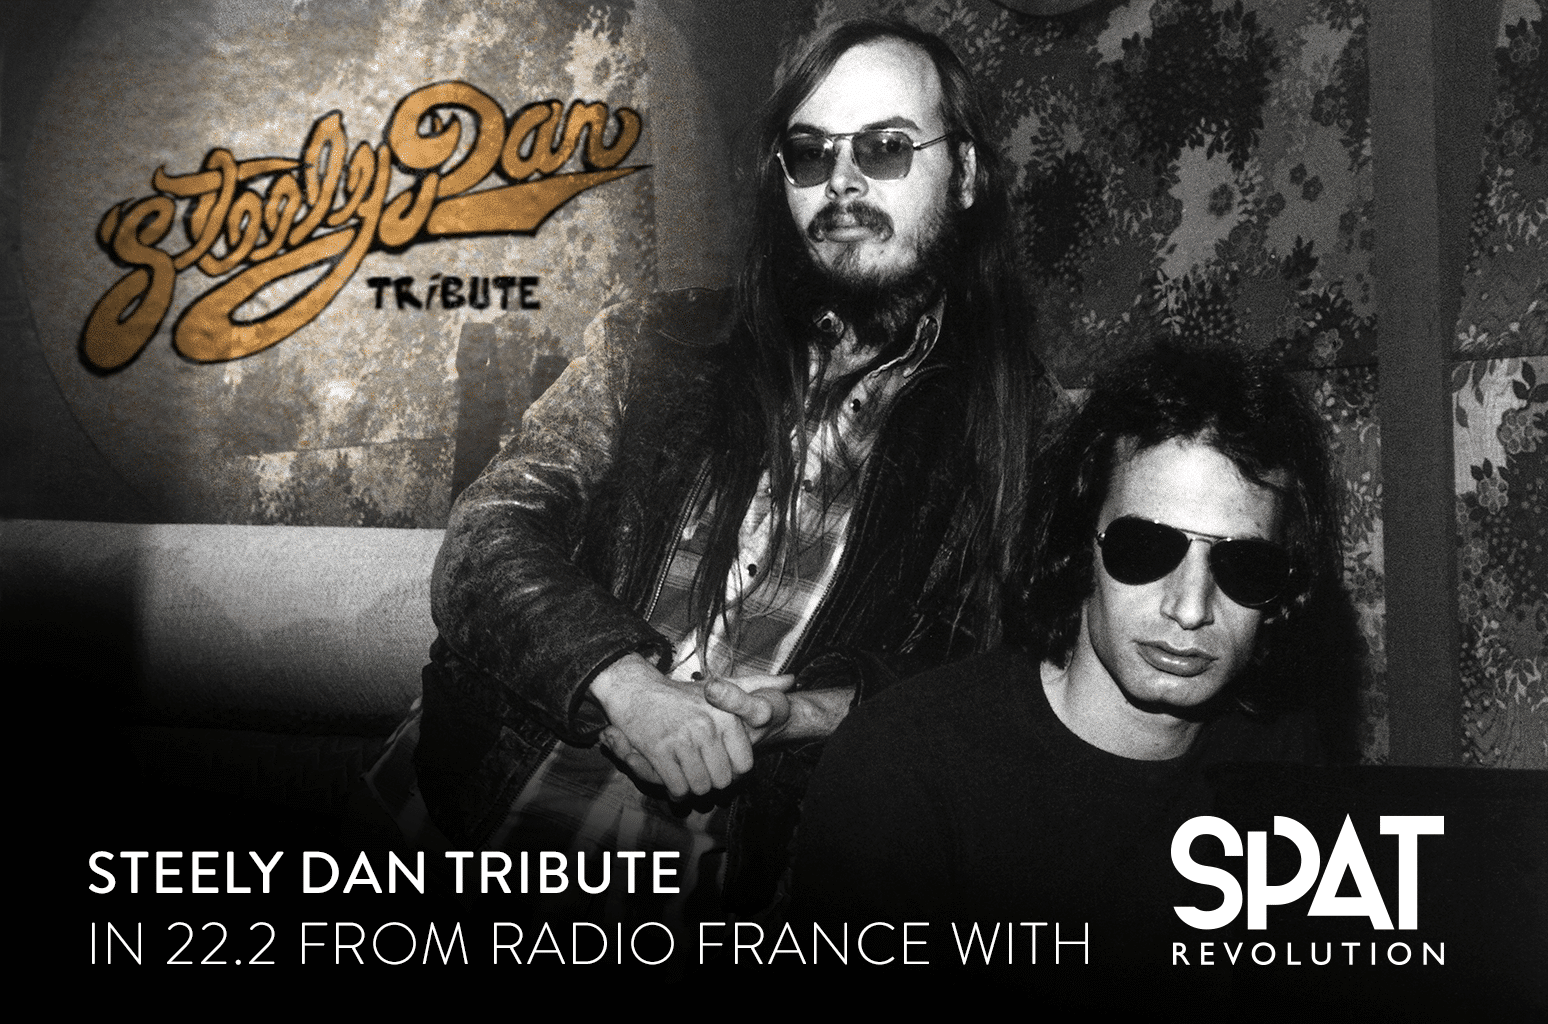 Steely Dan Tribute in 22.2 from Radio France with Spat Revolution